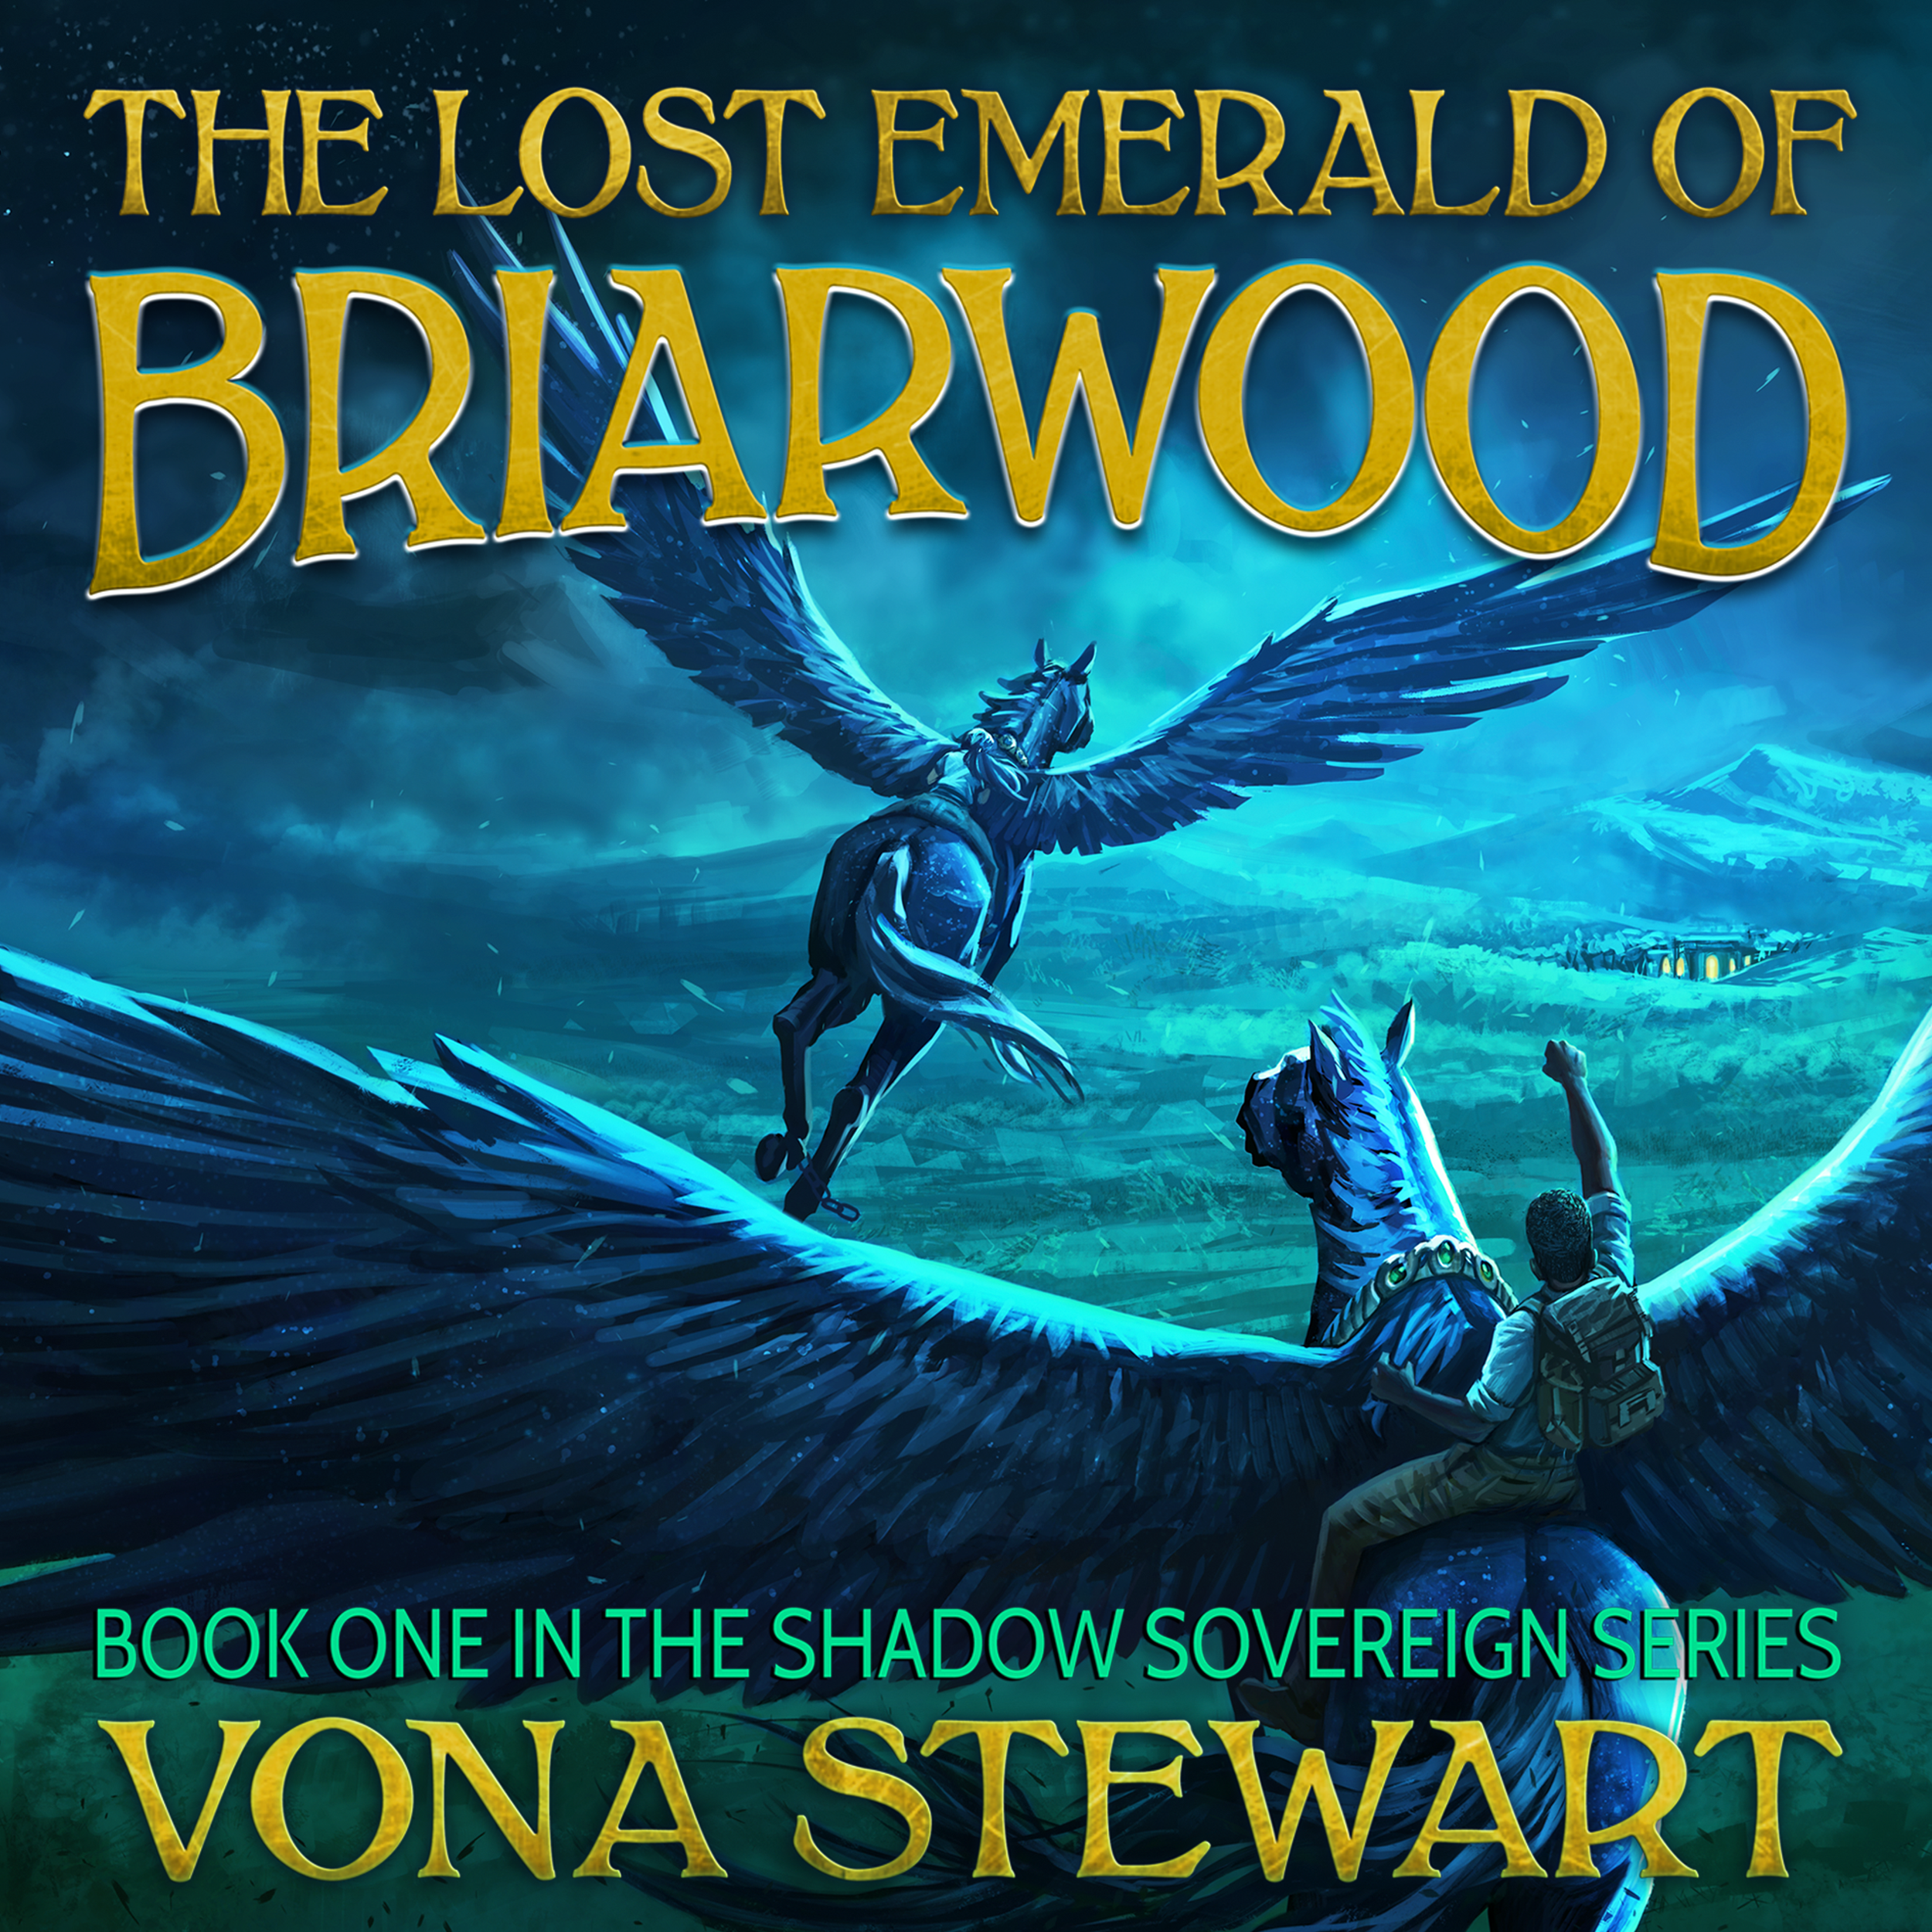 Audiobook_The Lost Emerald of Briarwood.png